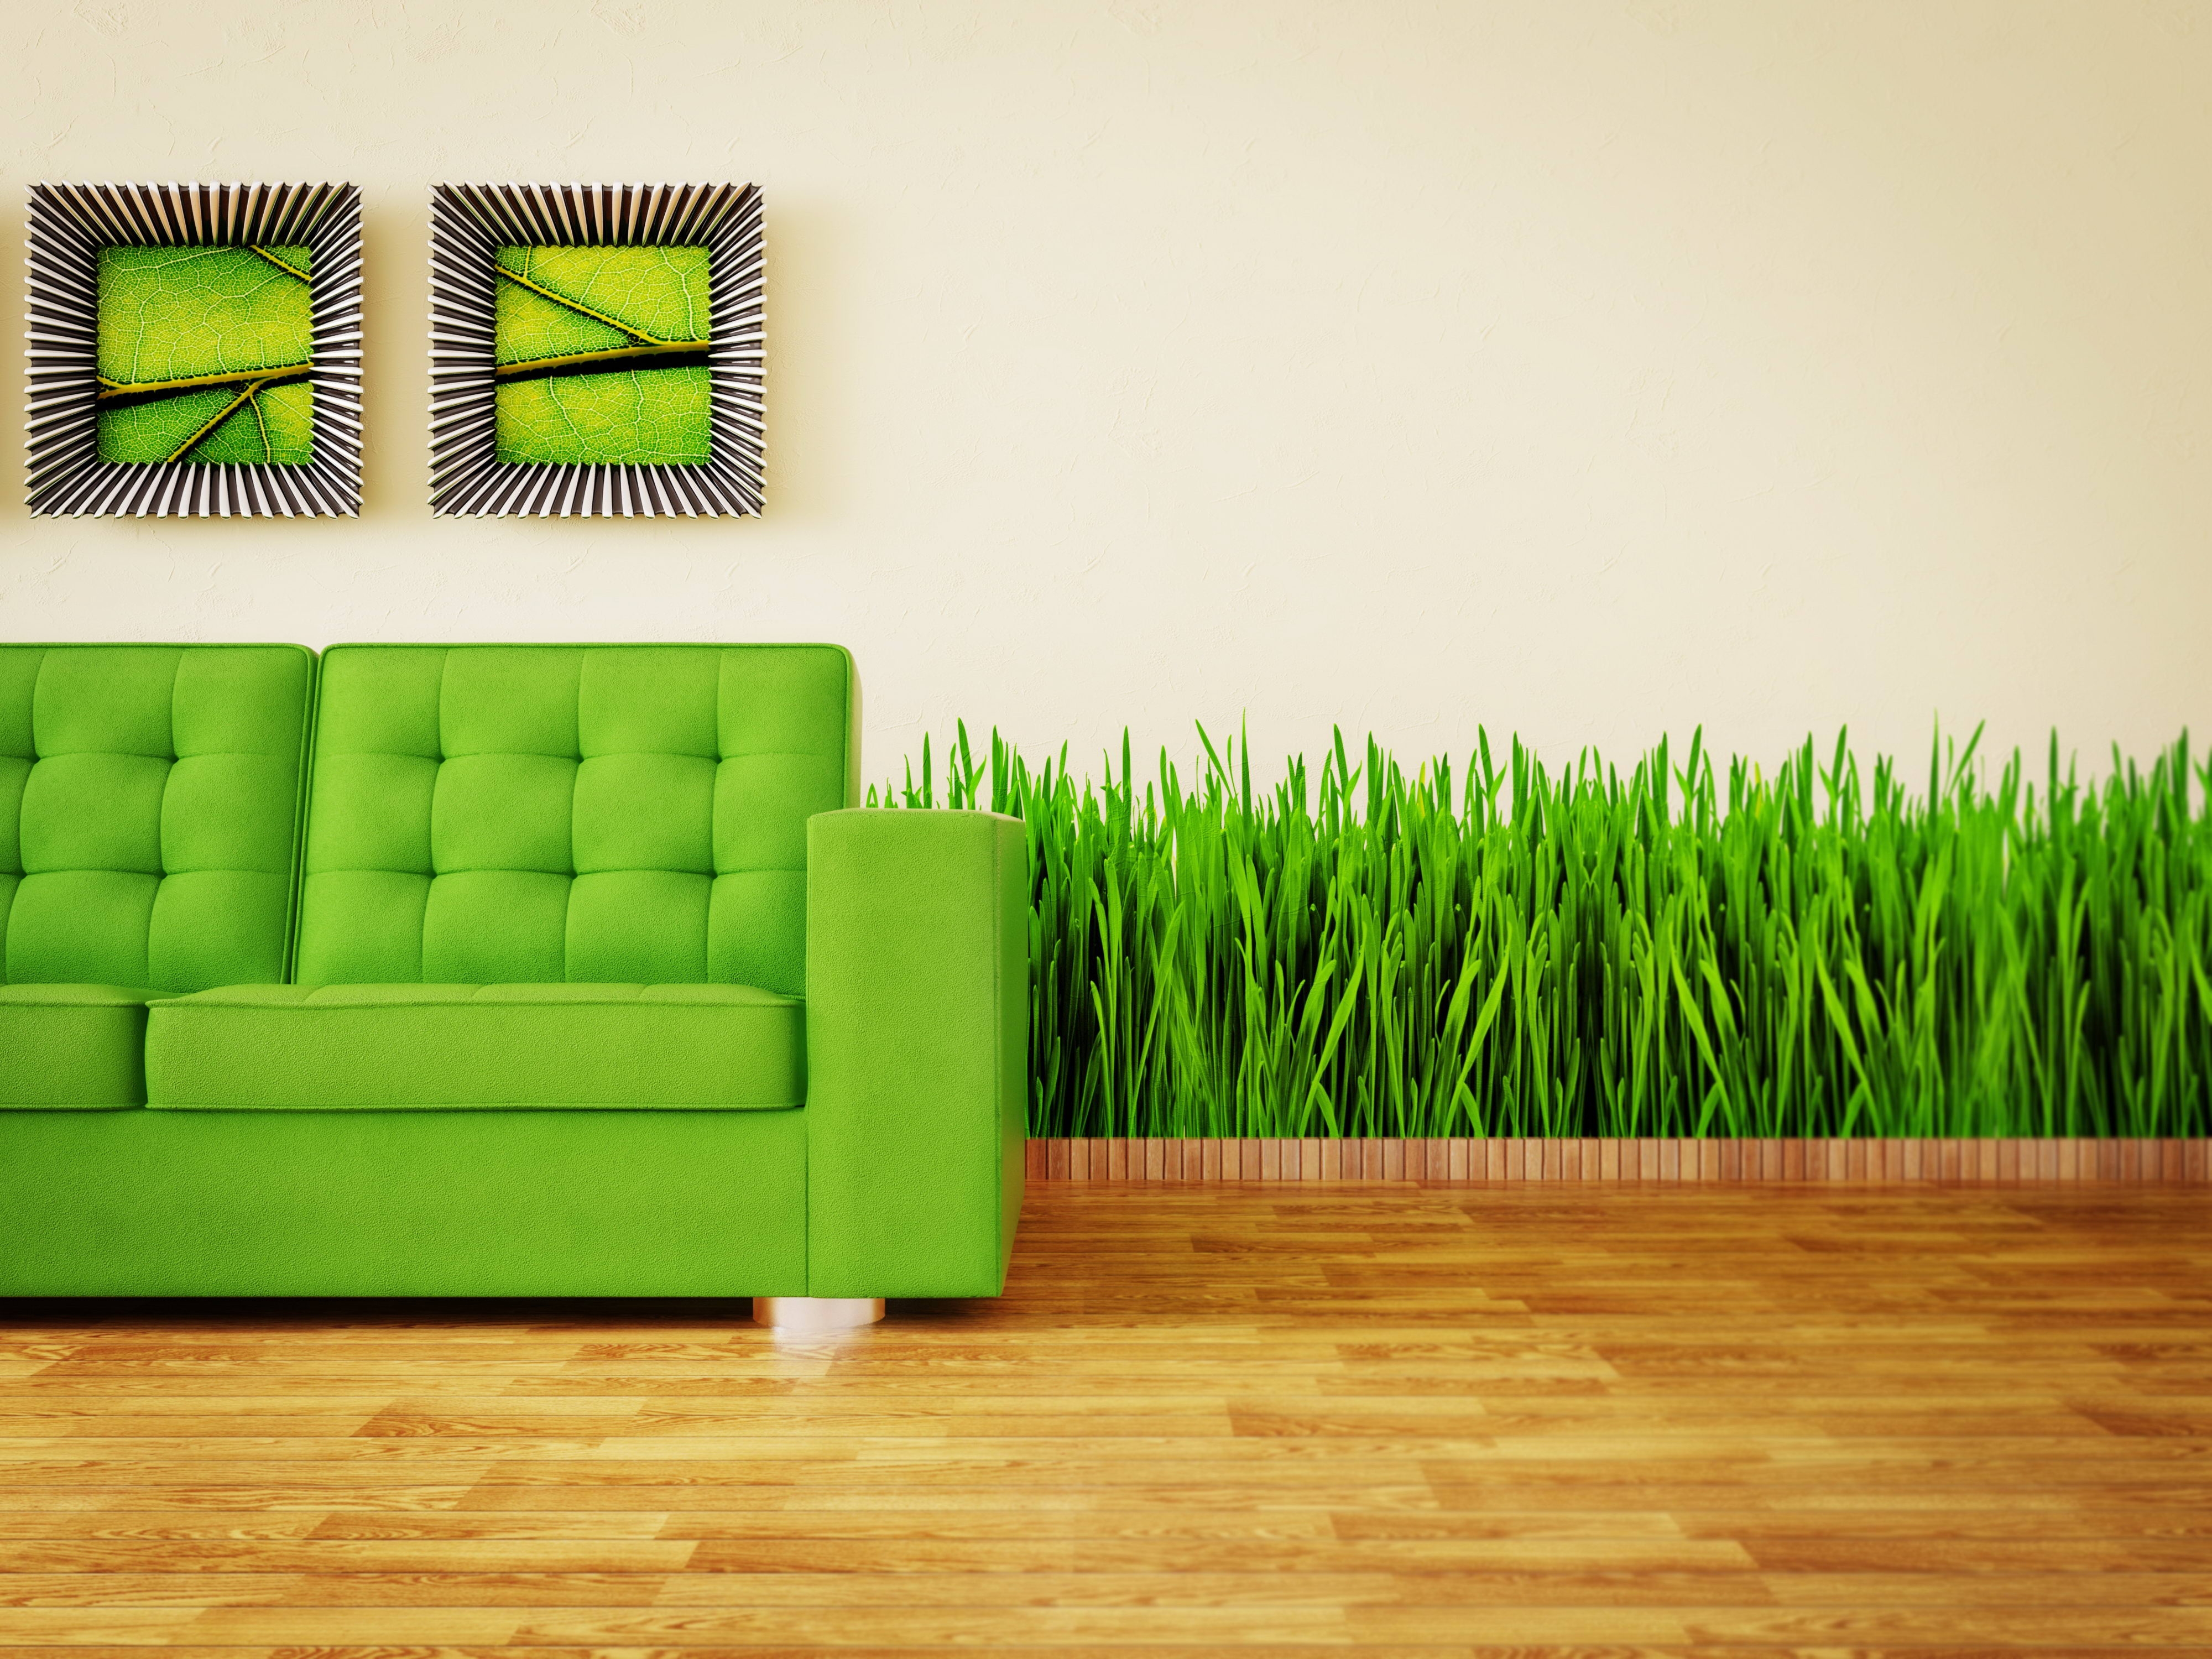 145753 download wallpaper interior, grass, paintings, miscellanea, miscellaneous, greens, sofa screensavers and pictures for free